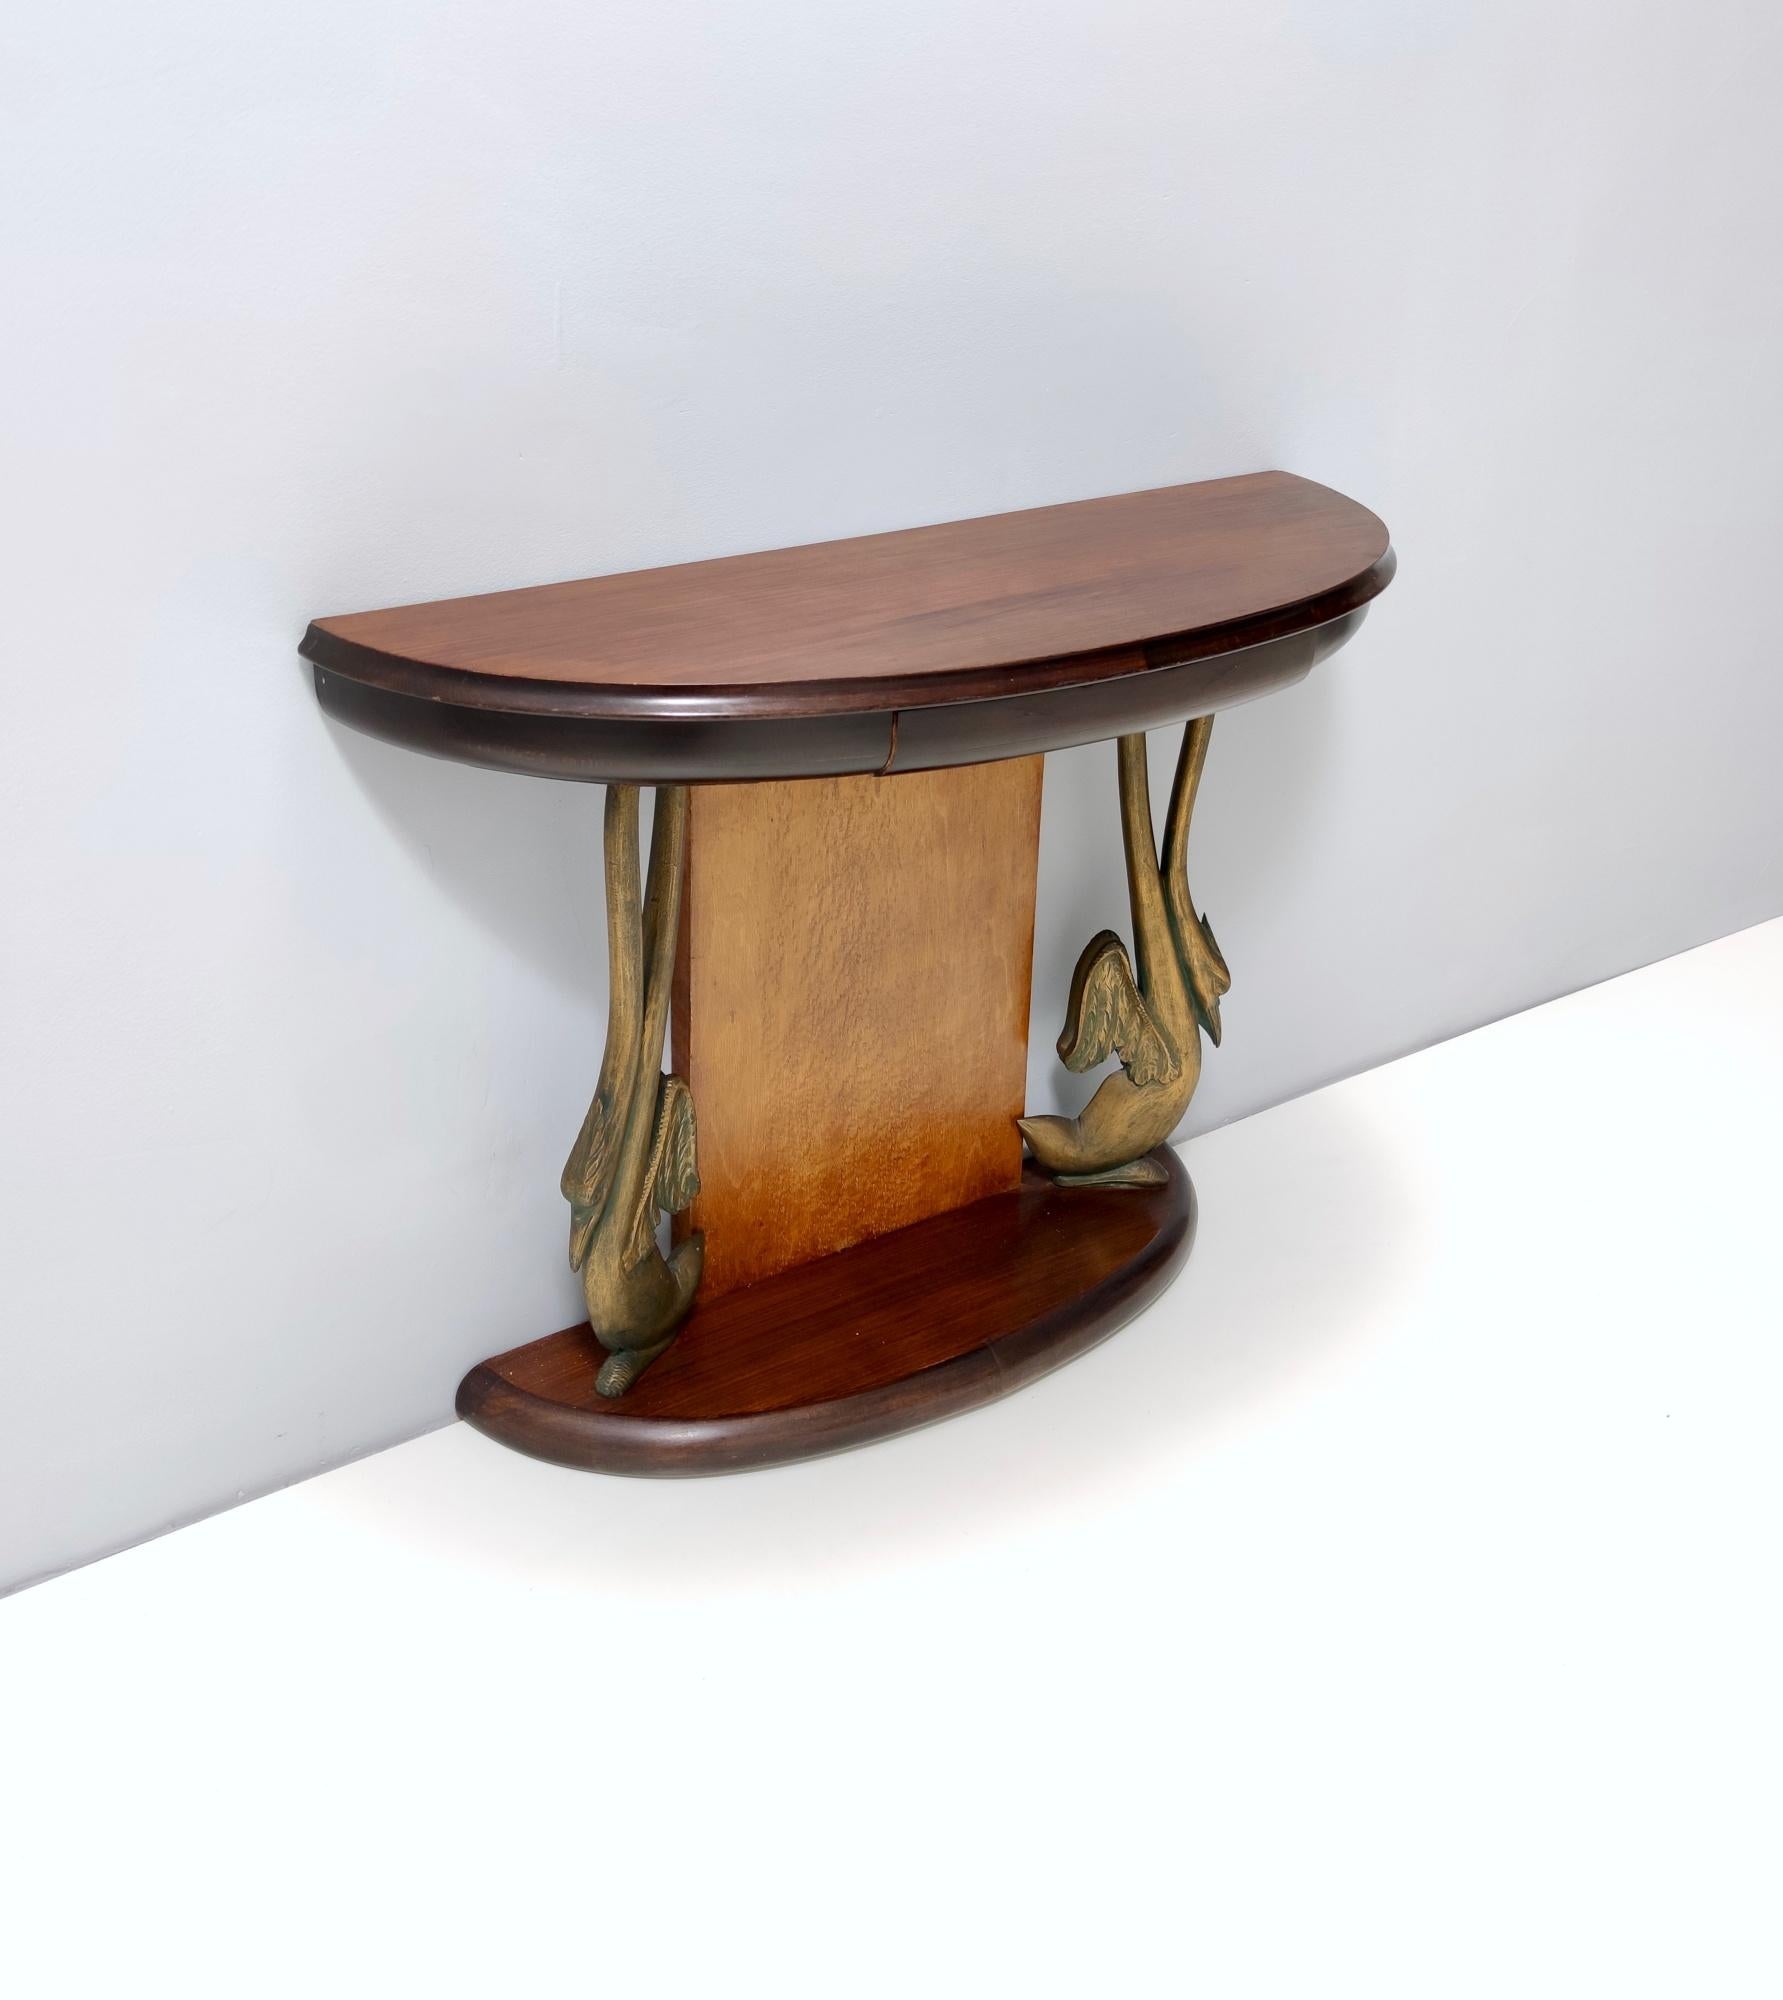 Dyed Vintage Sculptural Swan Motif Canaletto Walnut Console Table by Dassi, Italy